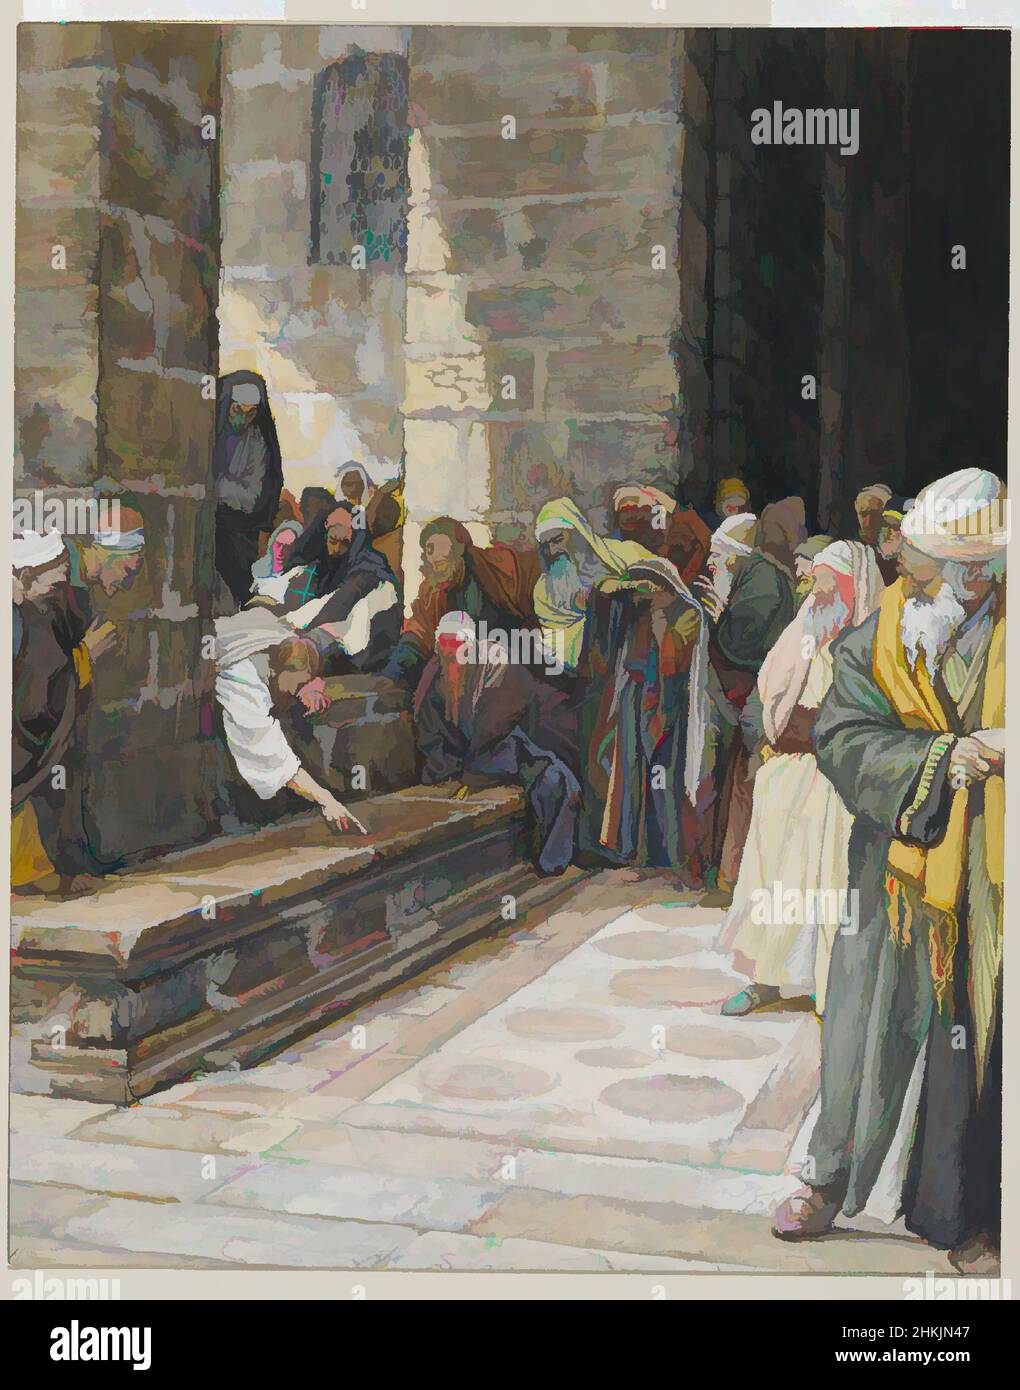 Art inspired by The Adulterous Woman--Christ Writing upon the Ground, La femme adultère--Christ écrit par terre, The Life of Our Lord Jesus Christ, La Vie de Notre-Seigneur Jésus-Christ, James Tissot, French, 1836-1902, Opaque watercolor over graphite on gray wove paper, France, 1886-, Classic works modernized by Artotop with a splash of modernity. Shapes, color and value, eye-catching visual impact on art. Emotions through freedom of artworks in a contemporary way. A timeless message pursuing a wildly creative new direction. Artists turning to the digital medium and creating the Artotop NFT Stock Photo